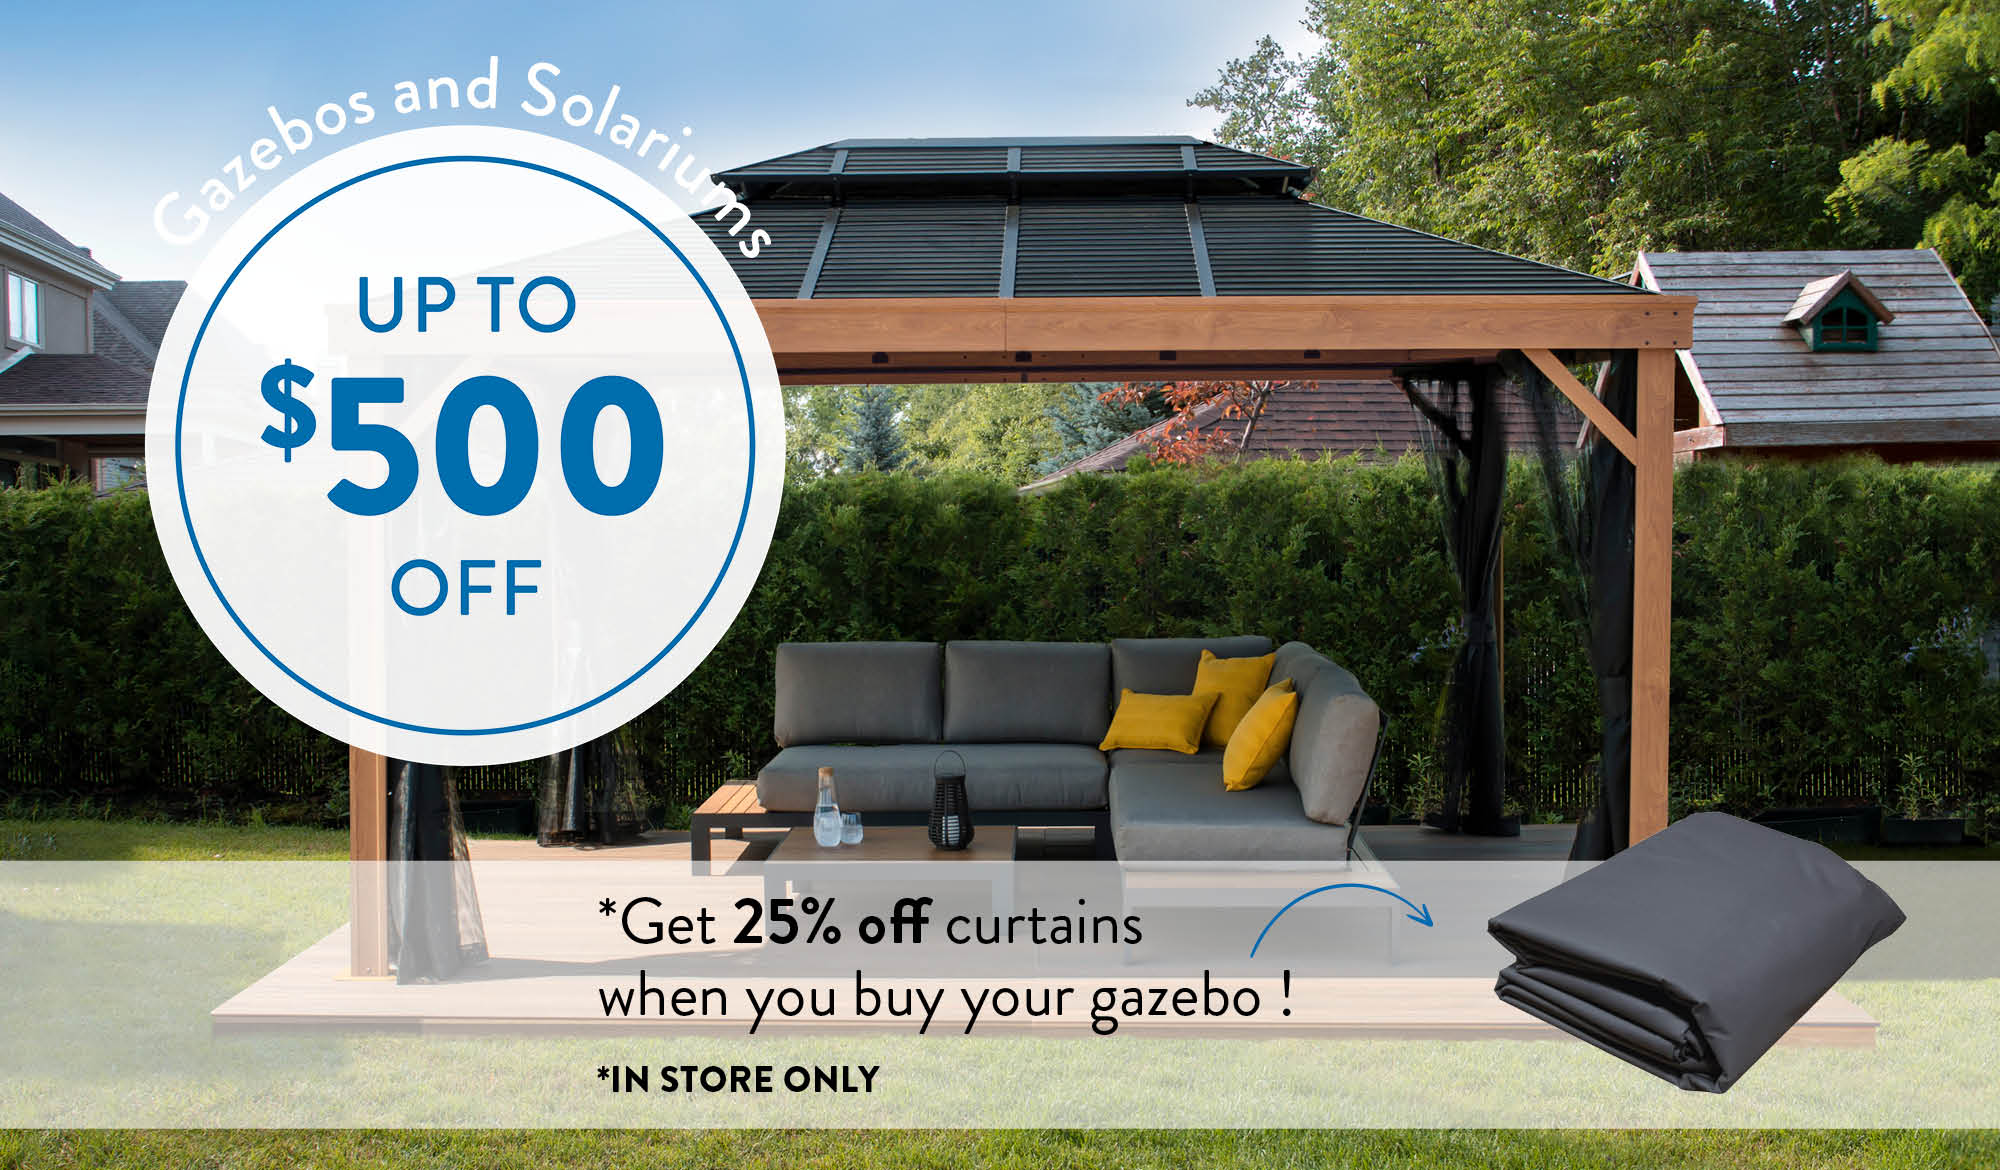 Up to $500 off gazebos and solariums